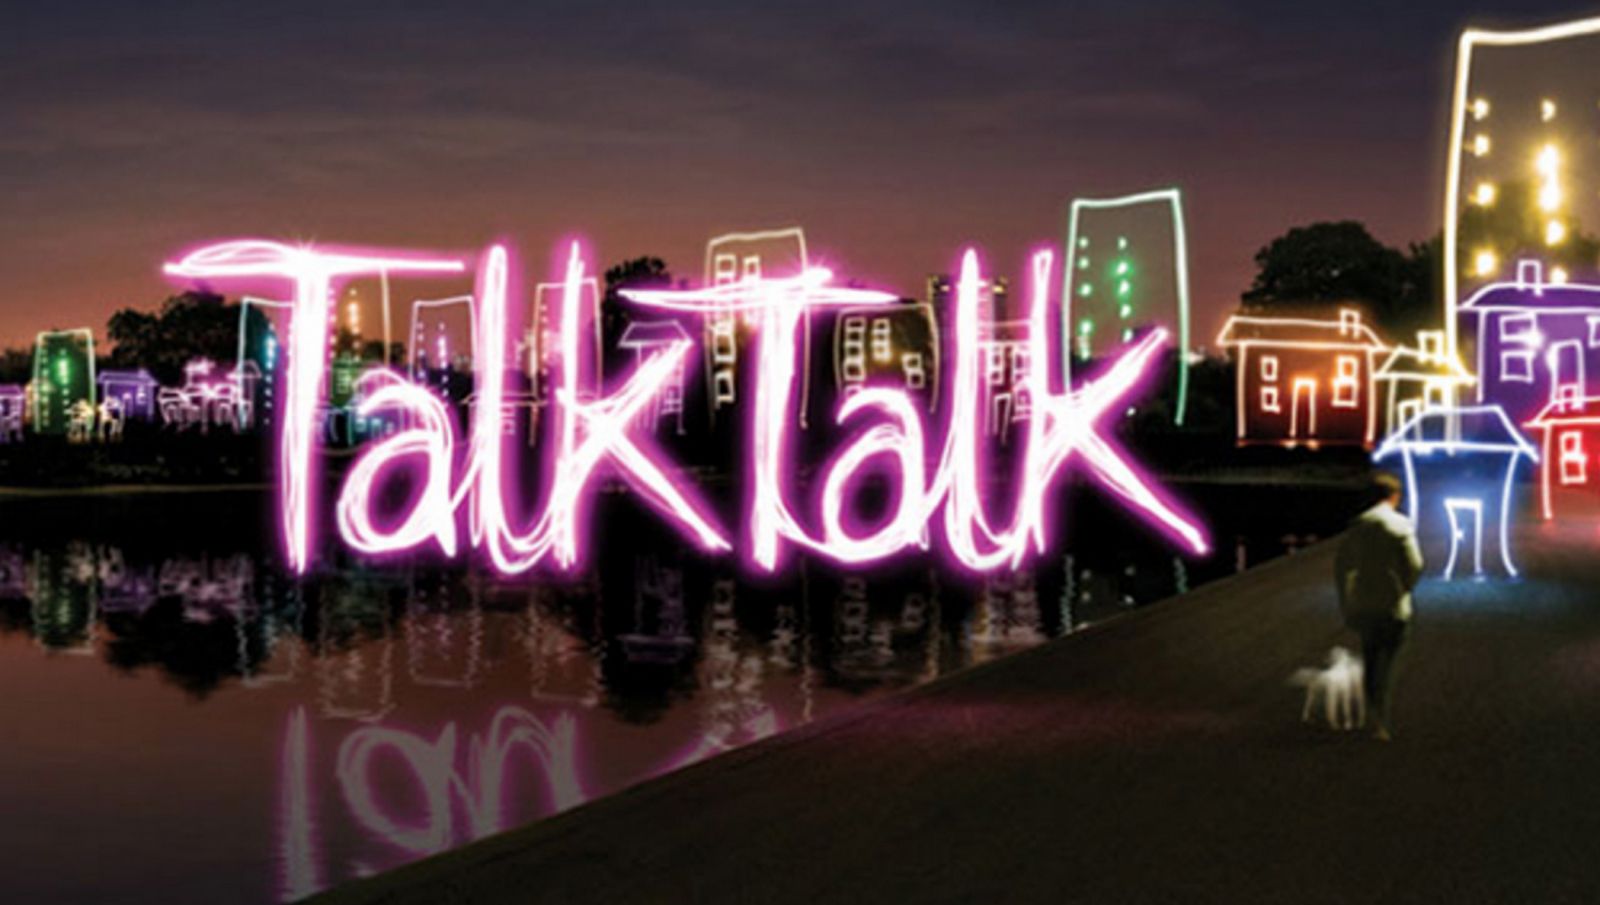 talktalk hack everything you need to know image 1